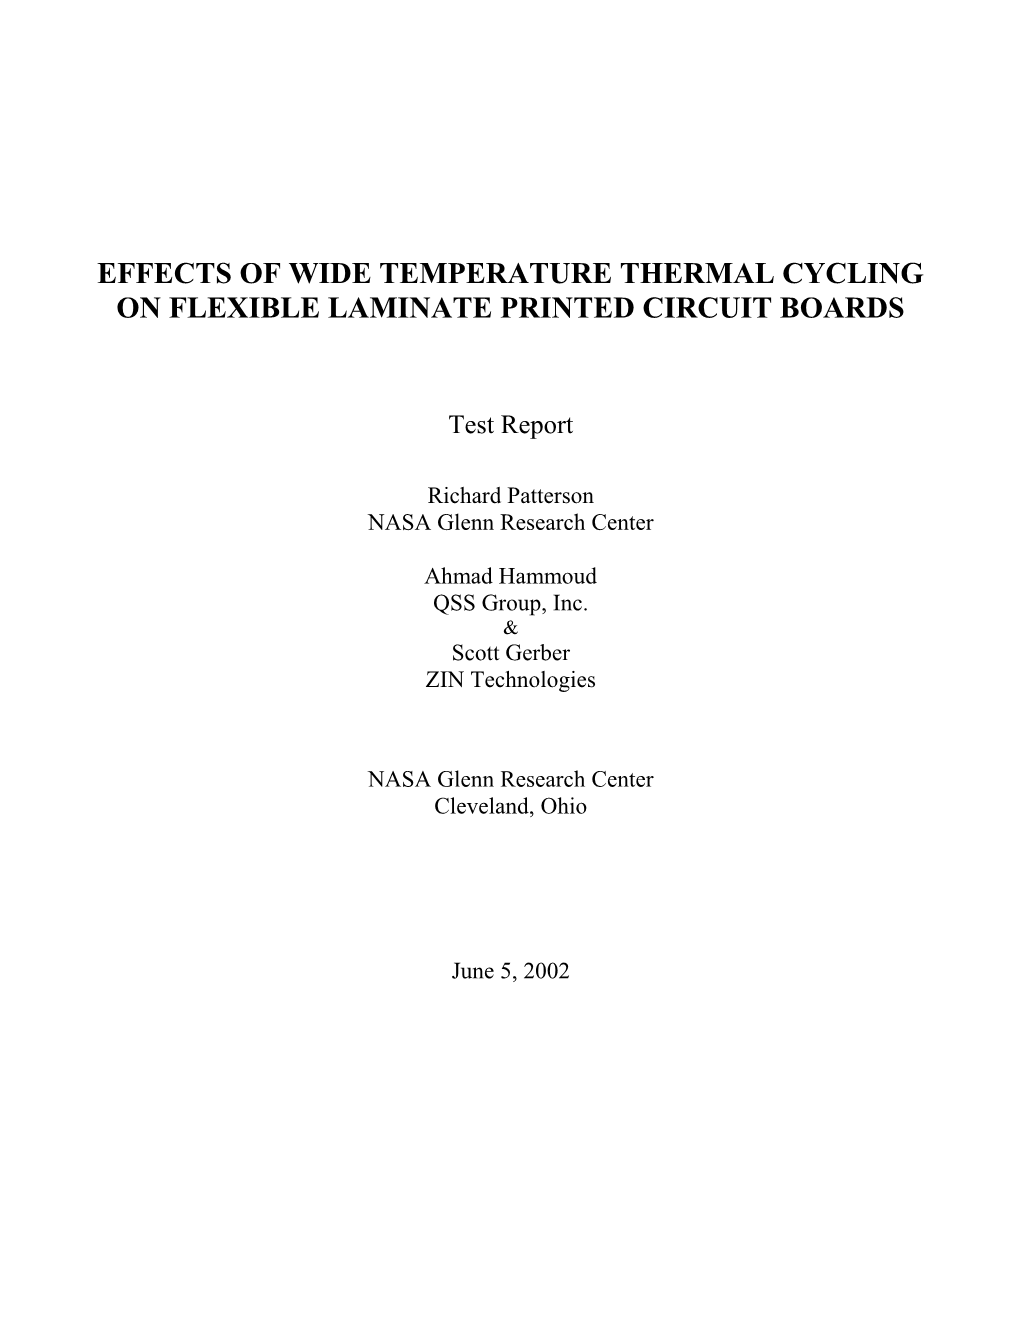 Effects of Wide Temperature Thermal Cycling on Flexible Laminate Printed Circuit Boards